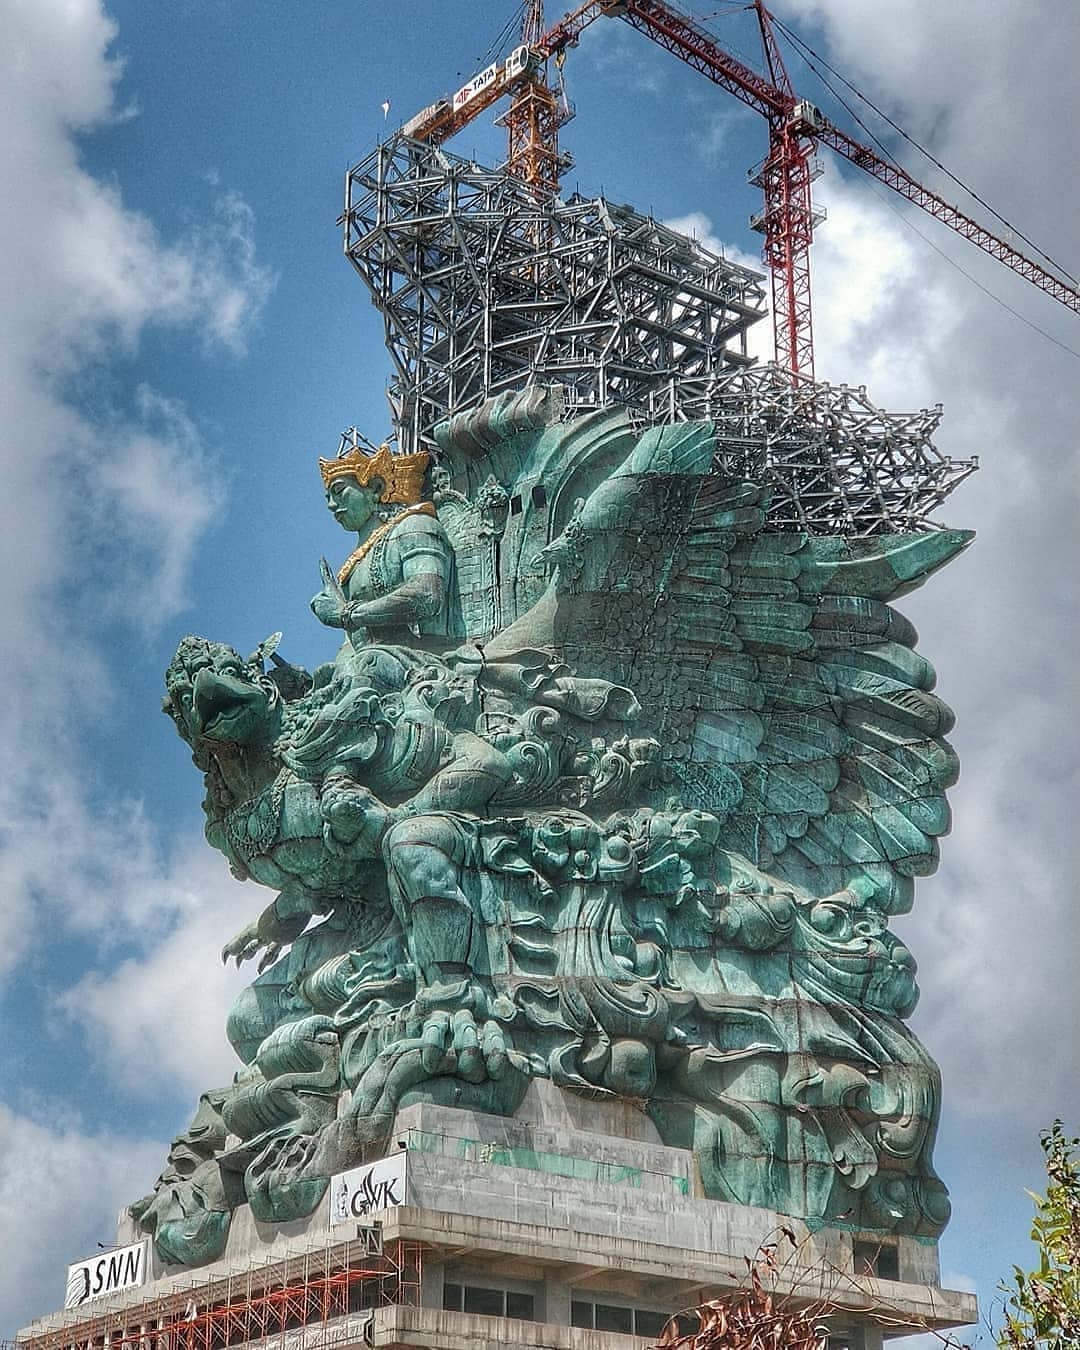 Construction Of The GWK Statue